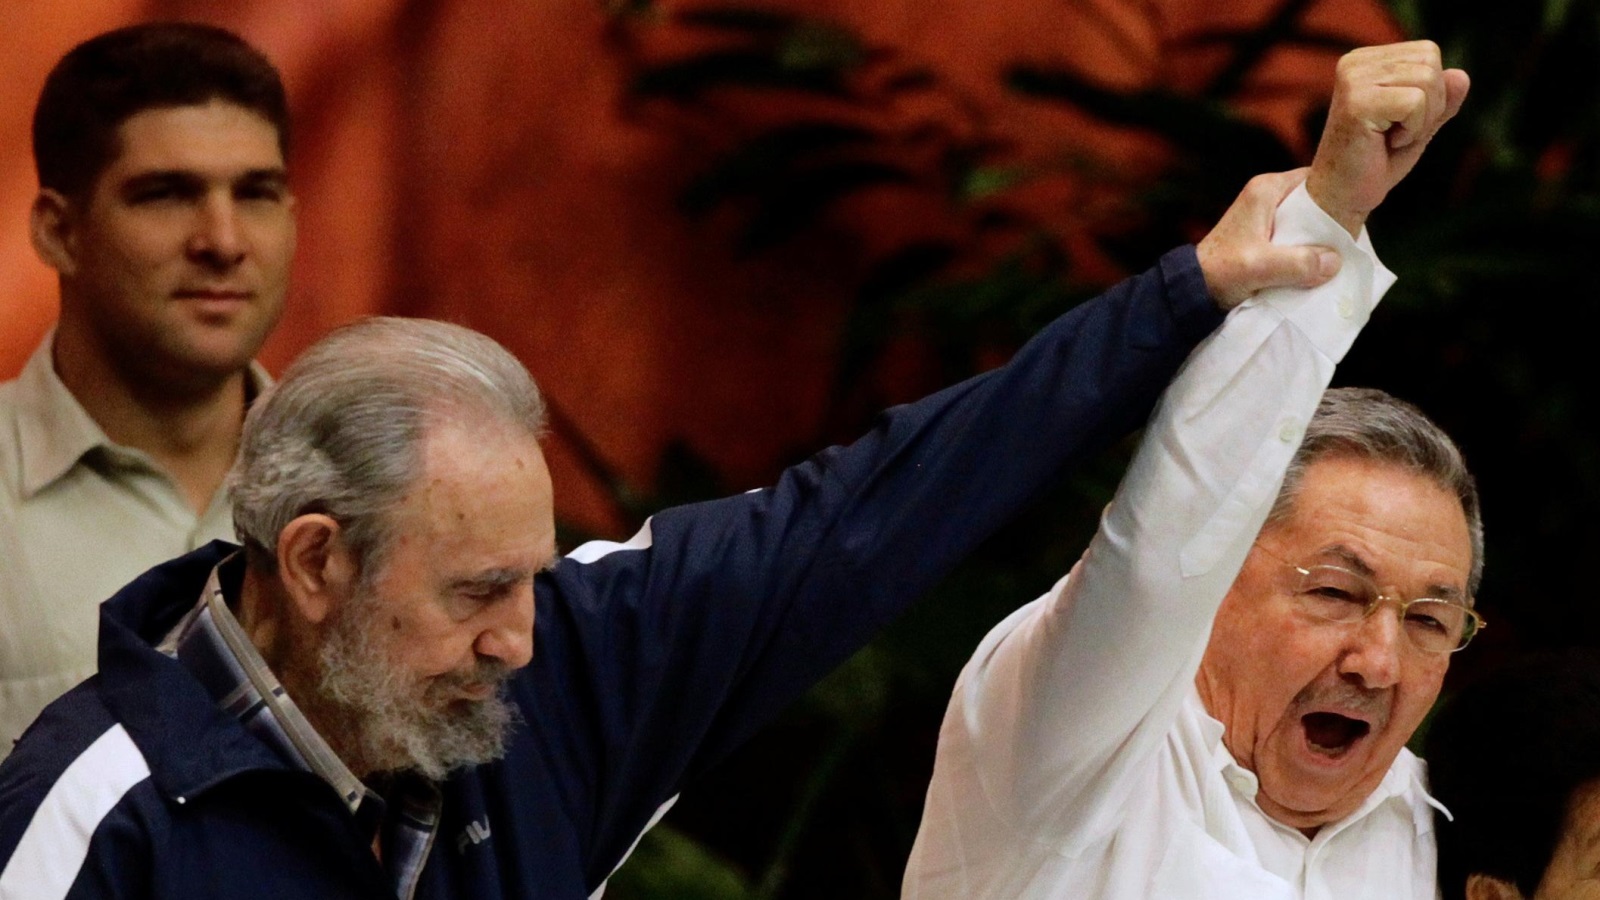 Former Cuban leader Fidel Castro (L) holds up the arm of his brother, Cuba's President Raul Castro, during the closing ceremony of the sixth Cuban Communist Party (PCC) congress in Havana in this April 19, 2011 file photo.  REUTERS/Desmond Boylan/File Photo